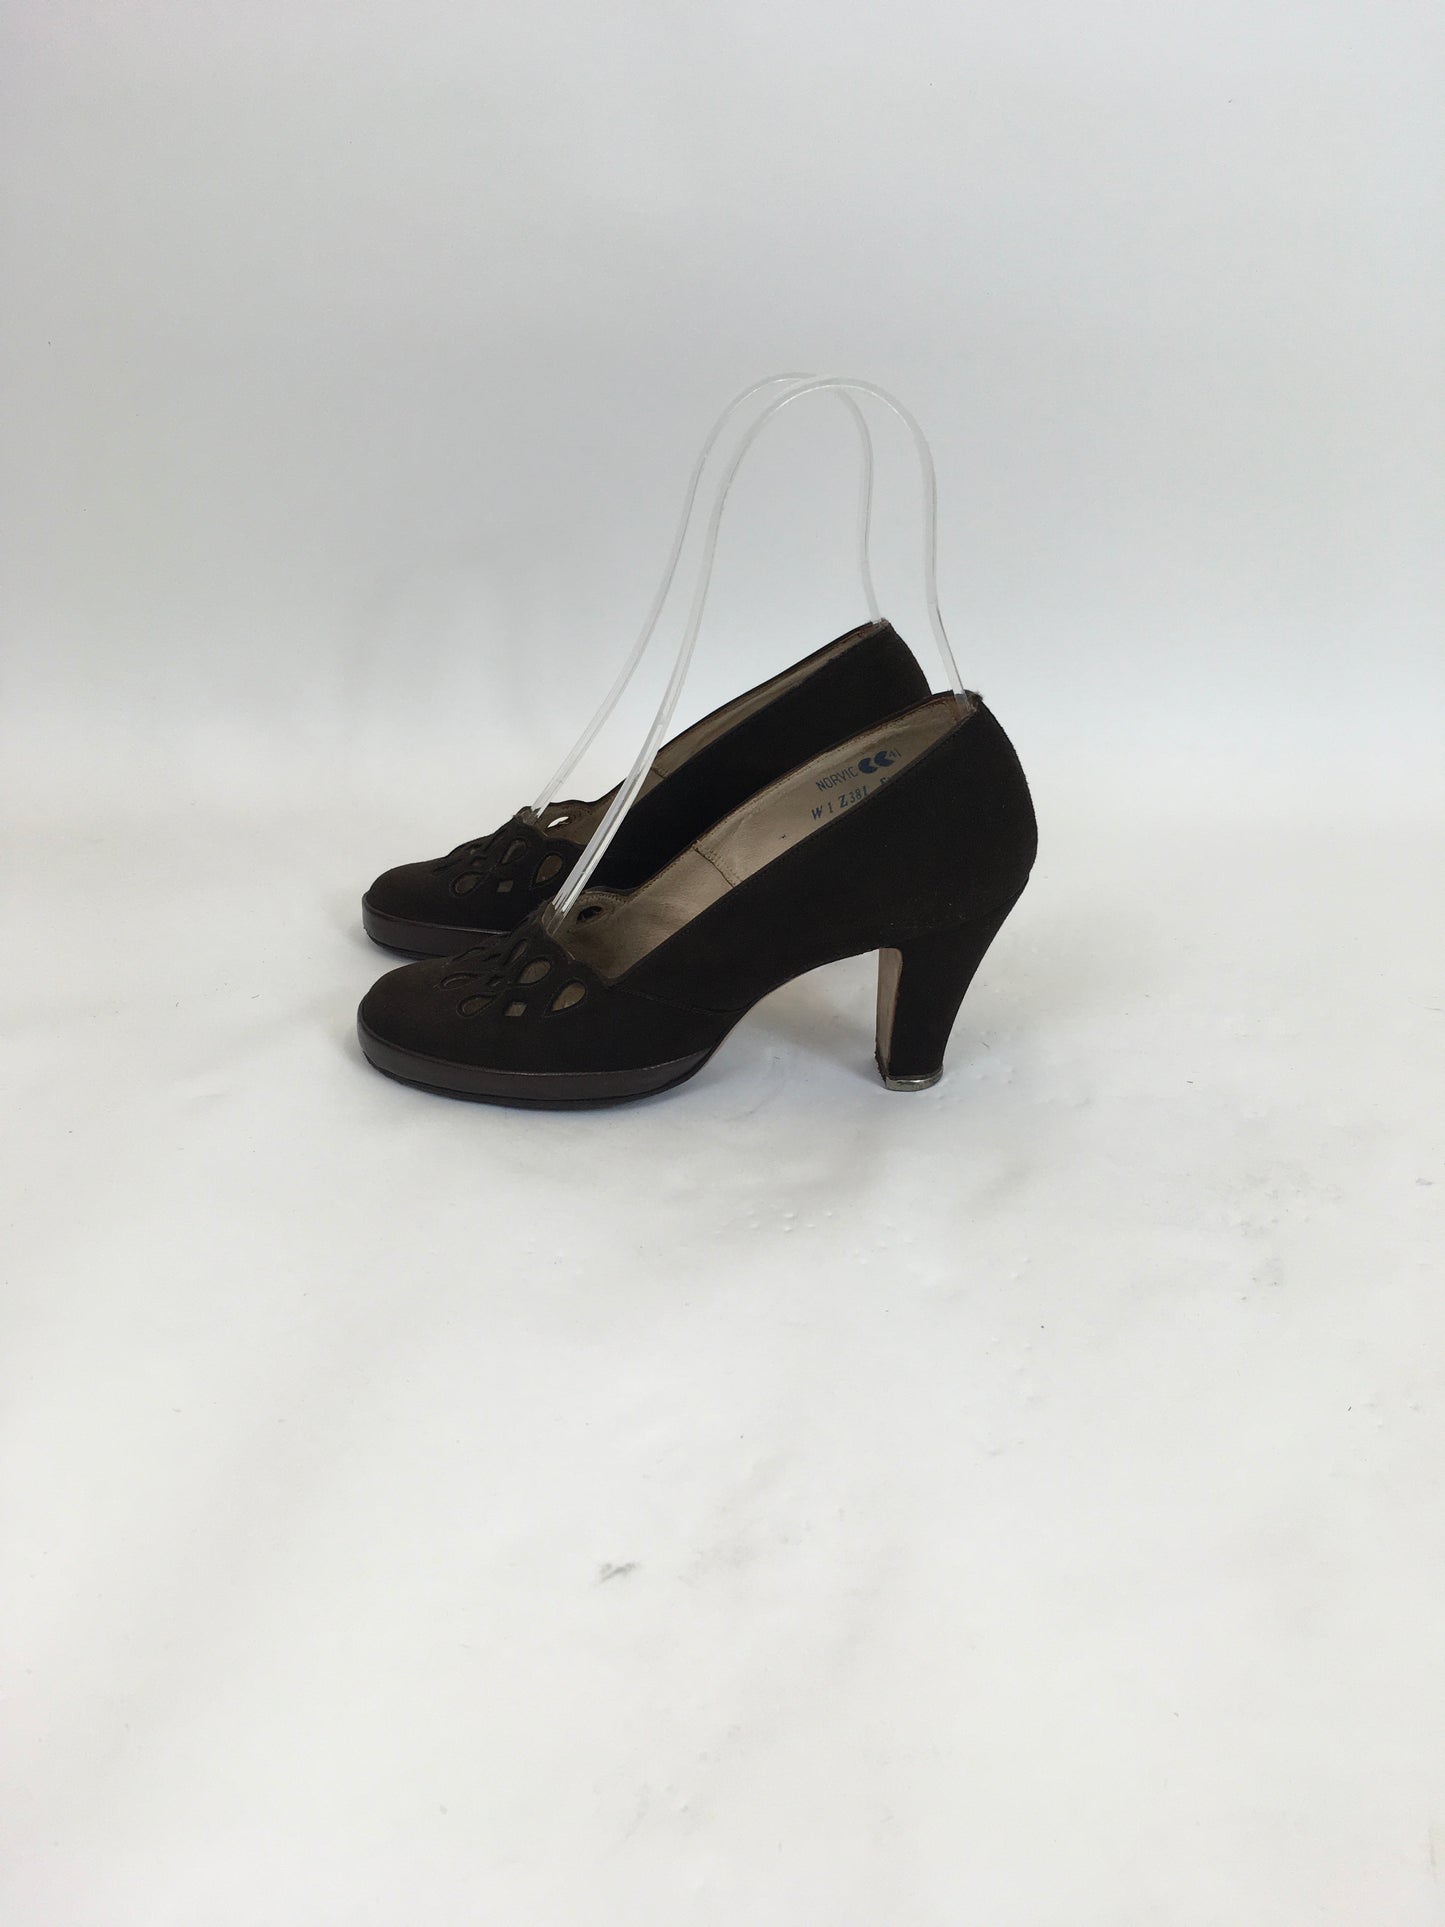 Original 1940's Stunning CC41 Norvic Heels With Original Box - In Chocolate Brown Suede